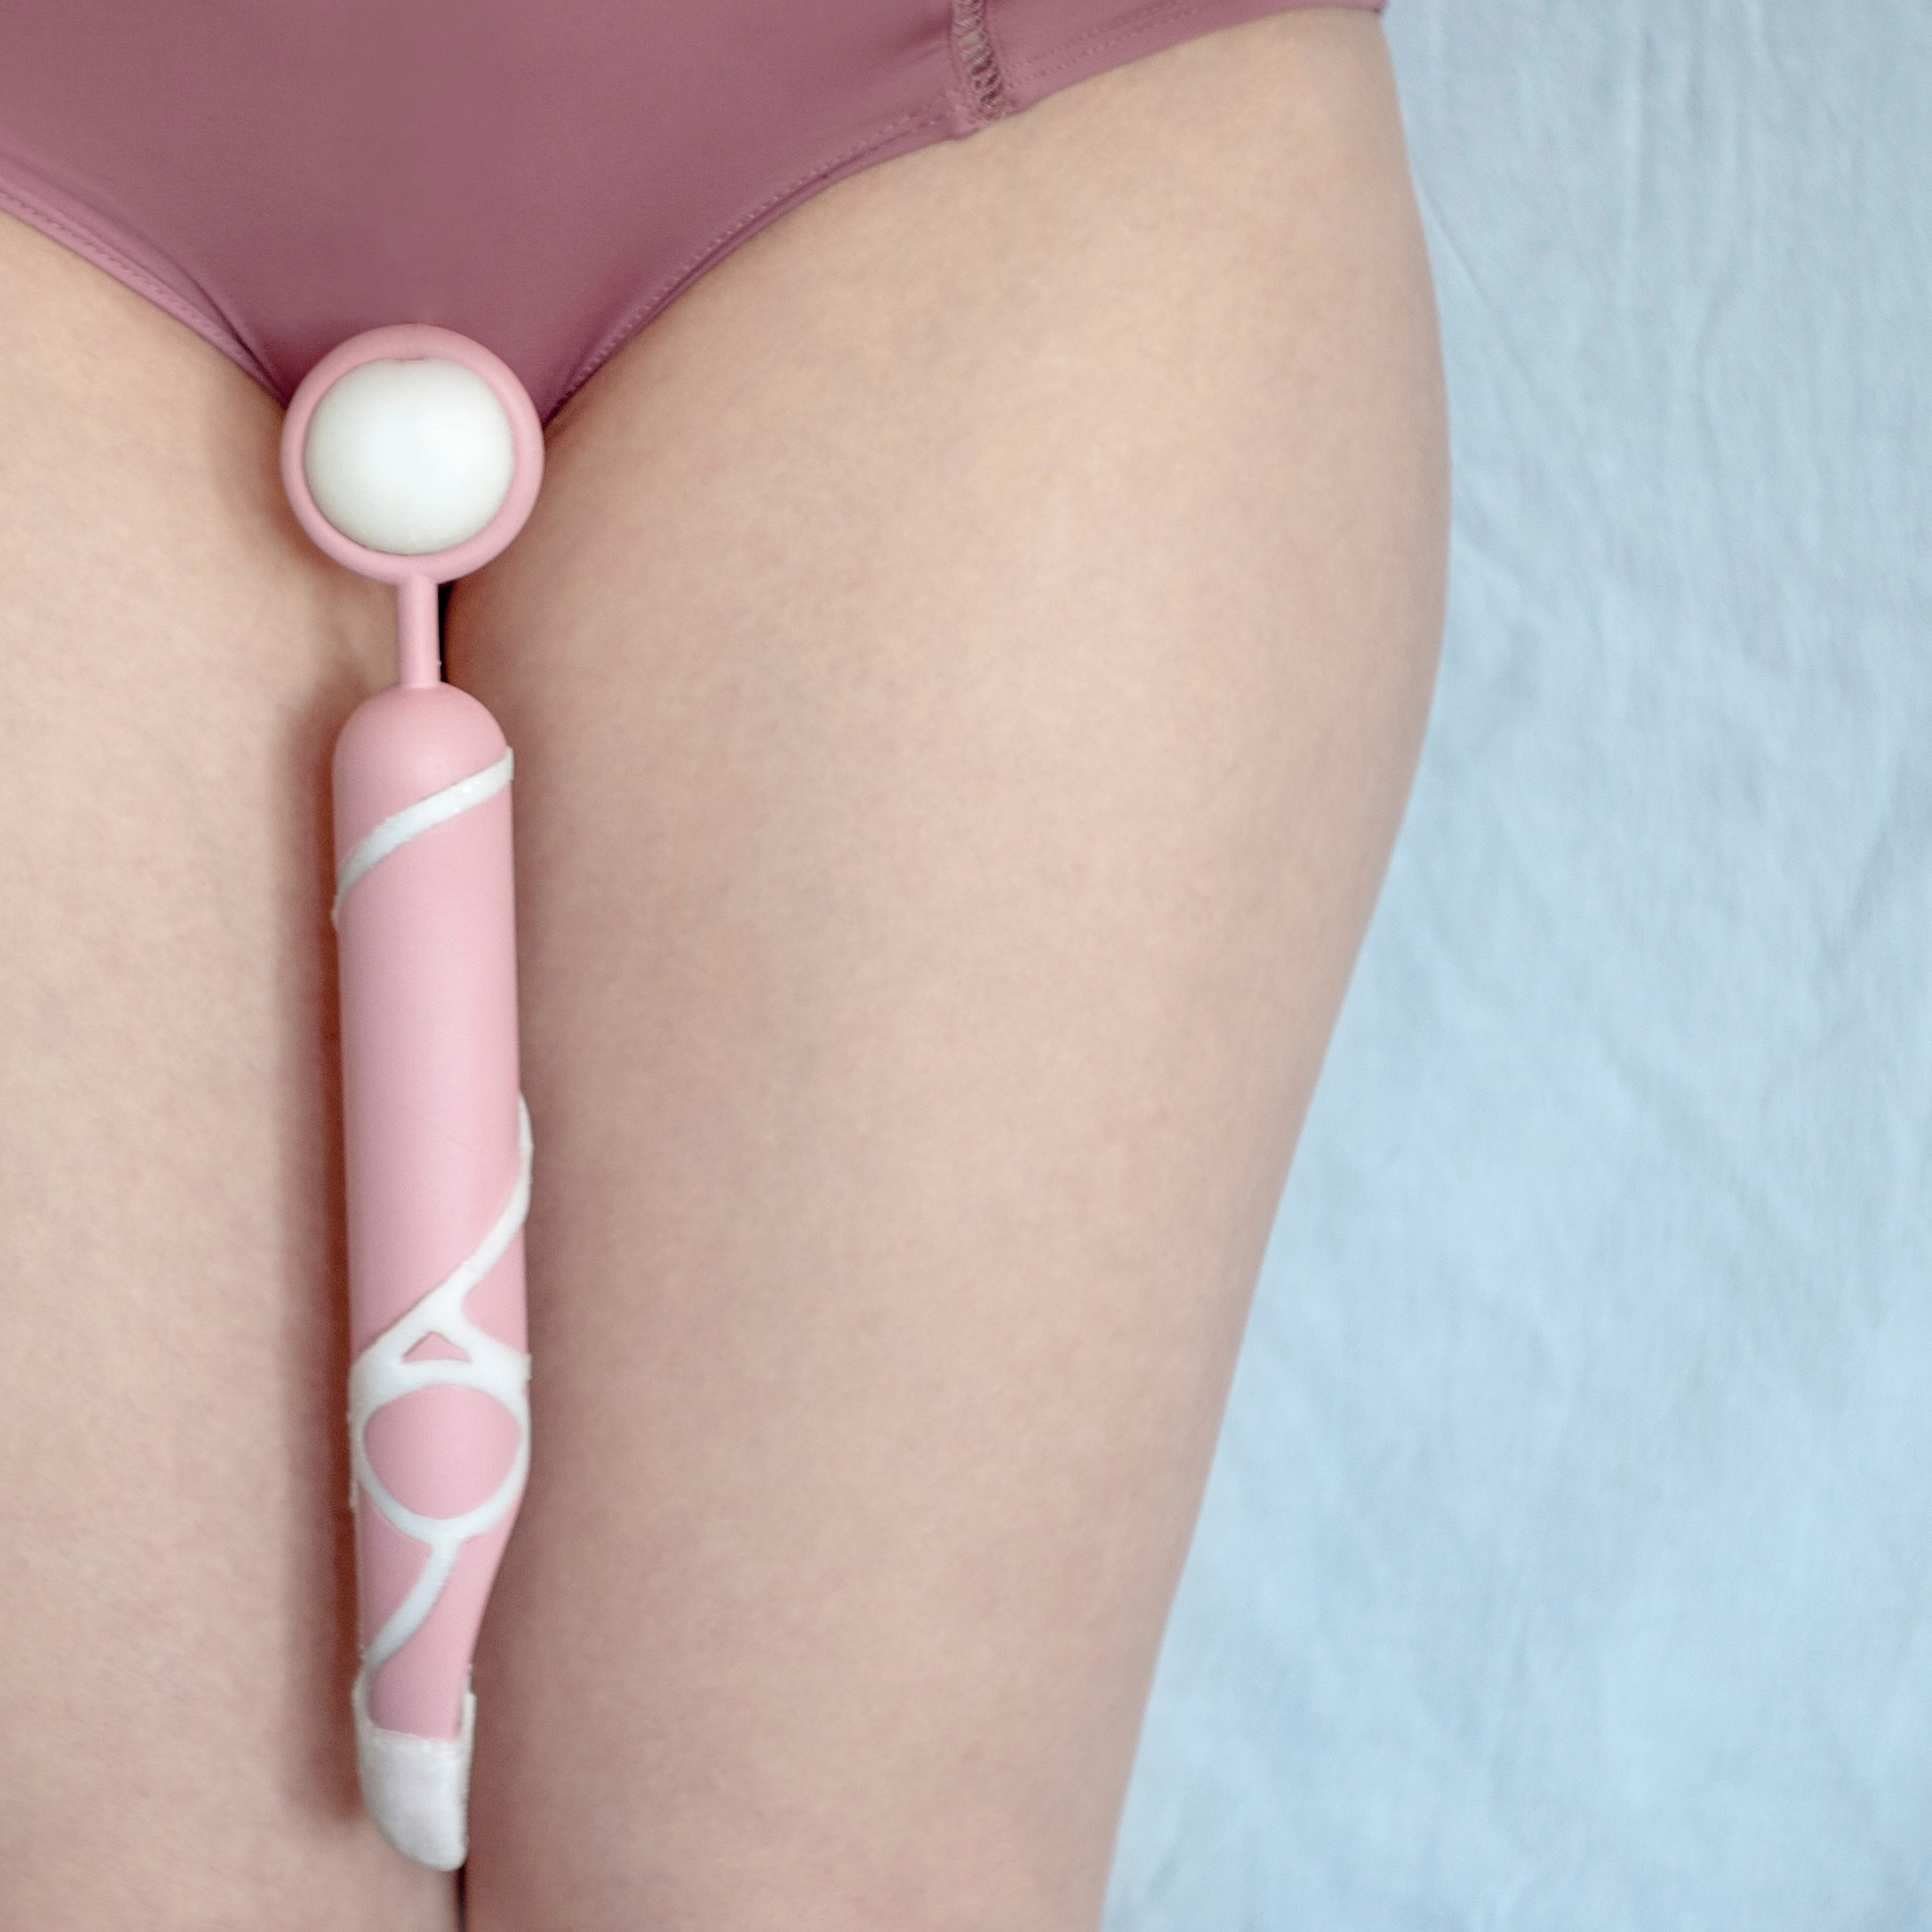 Kamila Rudnicka designs home insemination kit for use as part of sex